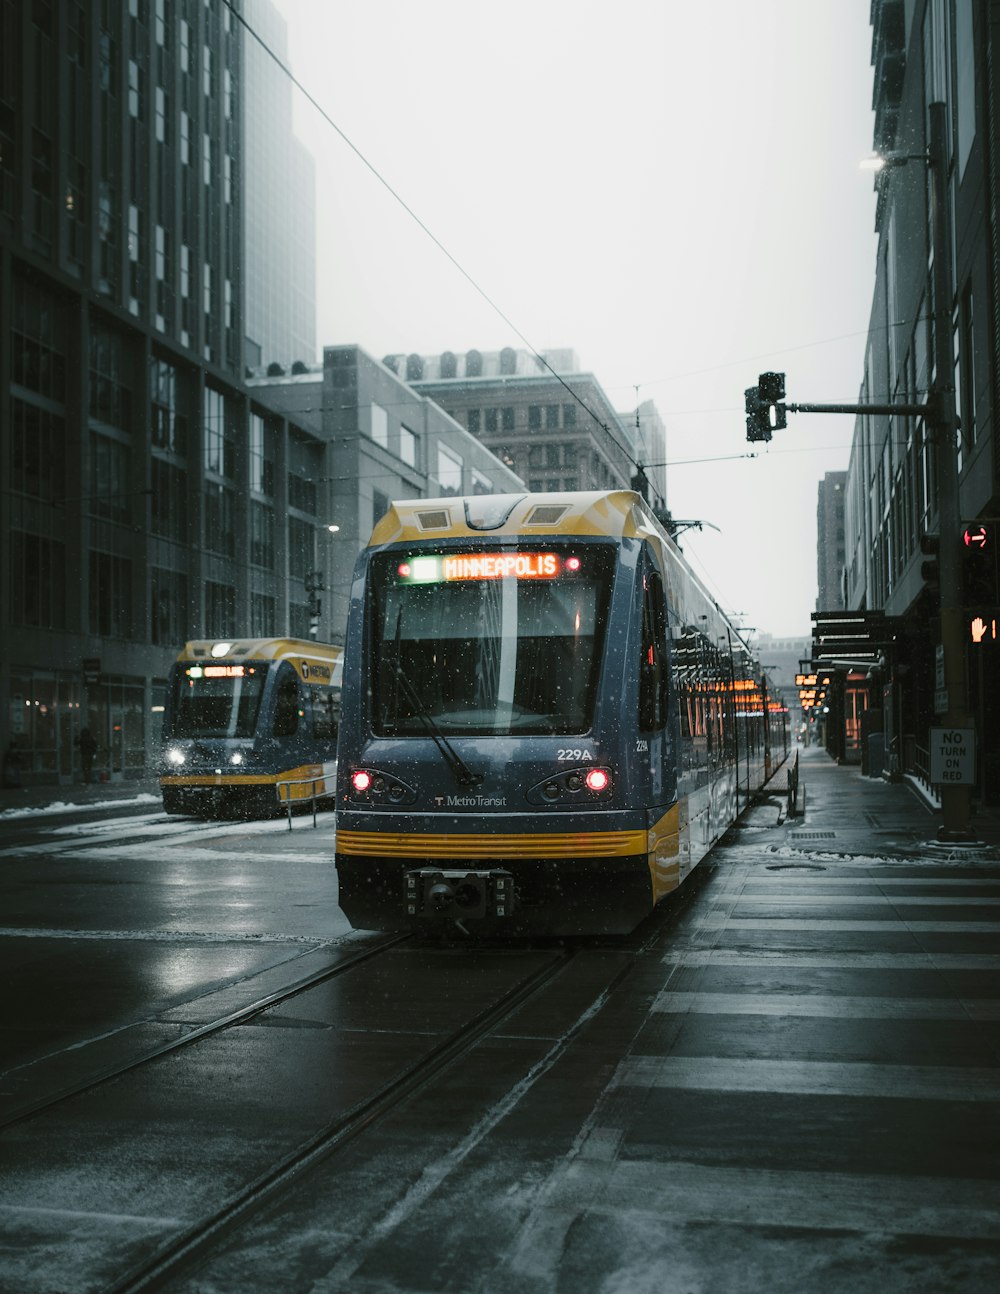 yellow and gray bus on street during cloudy daytime